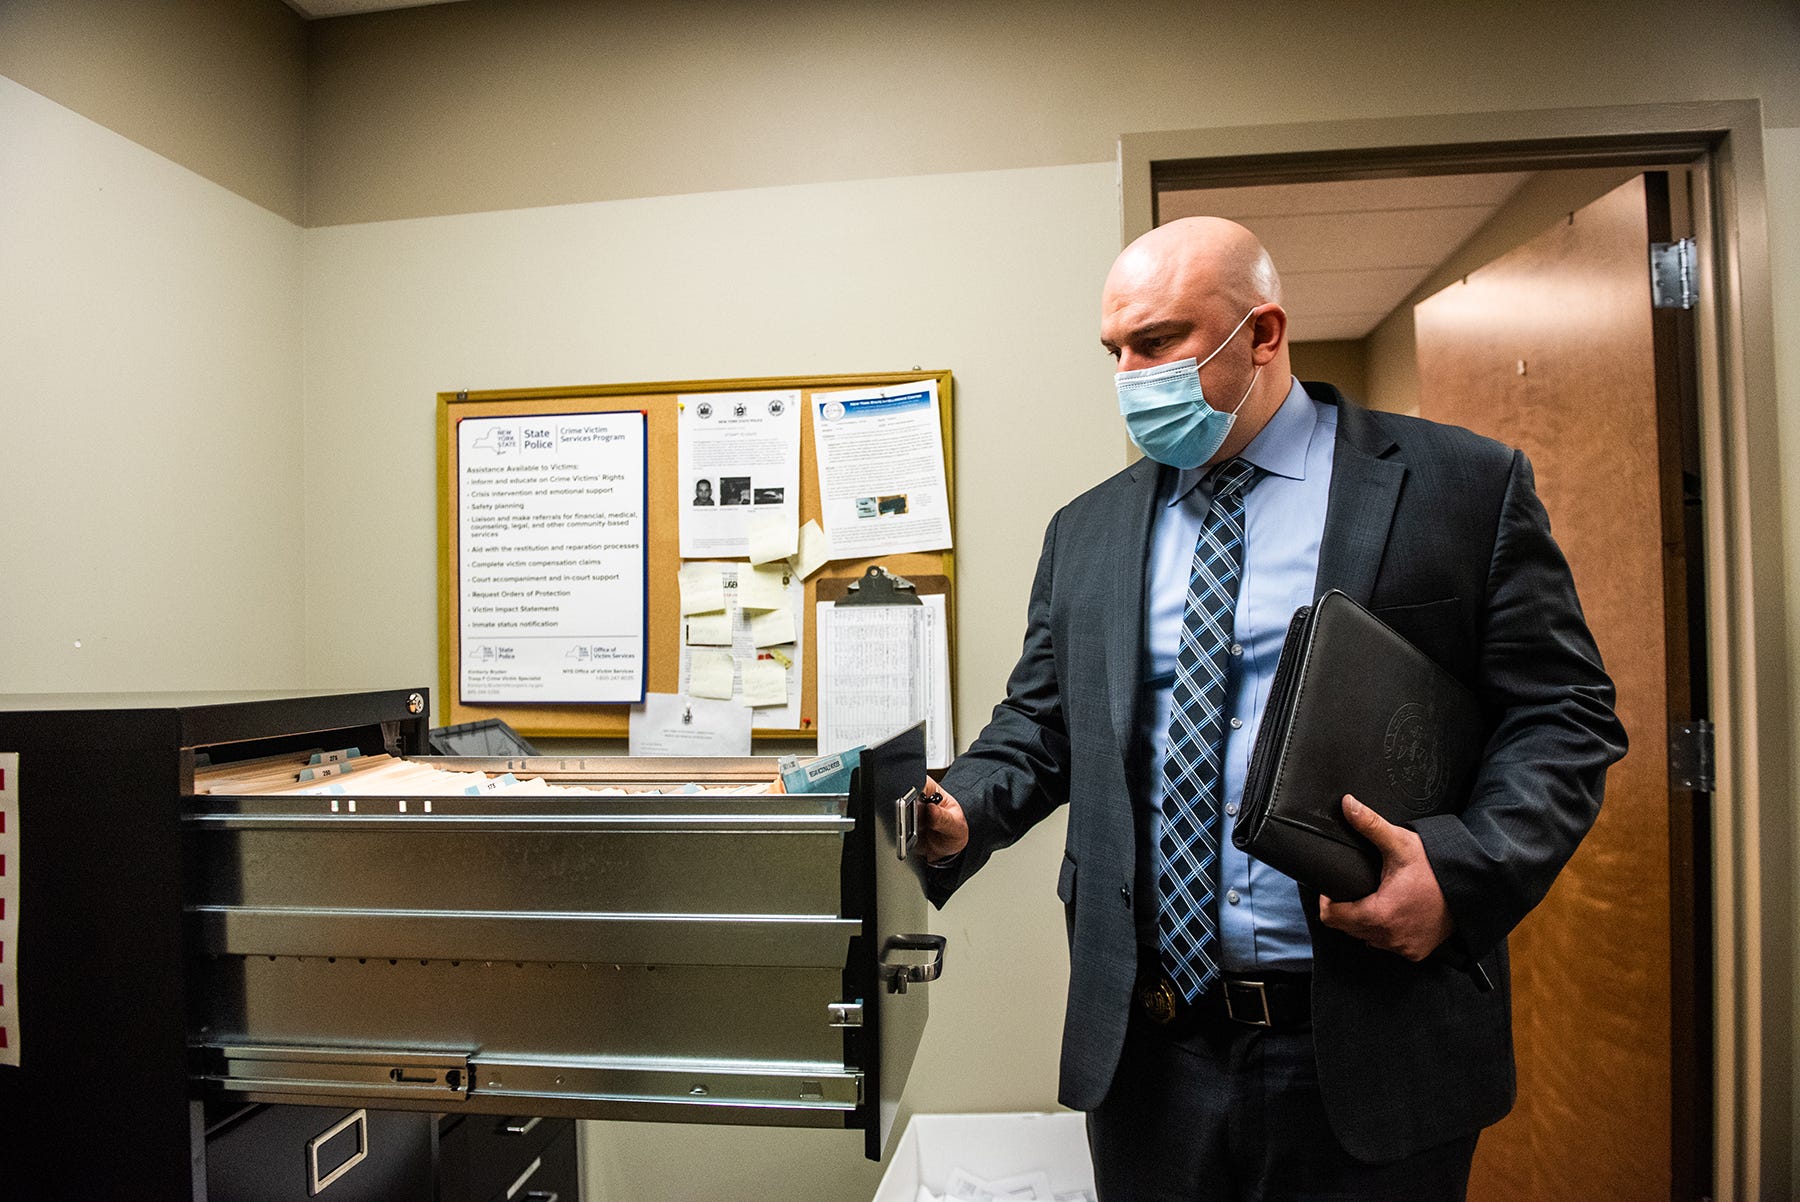 Brad Natalizio, New York State Police Investigator,  closes a filing cabinet draw full of organized leads on the Megan McDonald case at the New York State Police Barracks in the Town of Wallkill, NY on Friday, March 5, 2021.